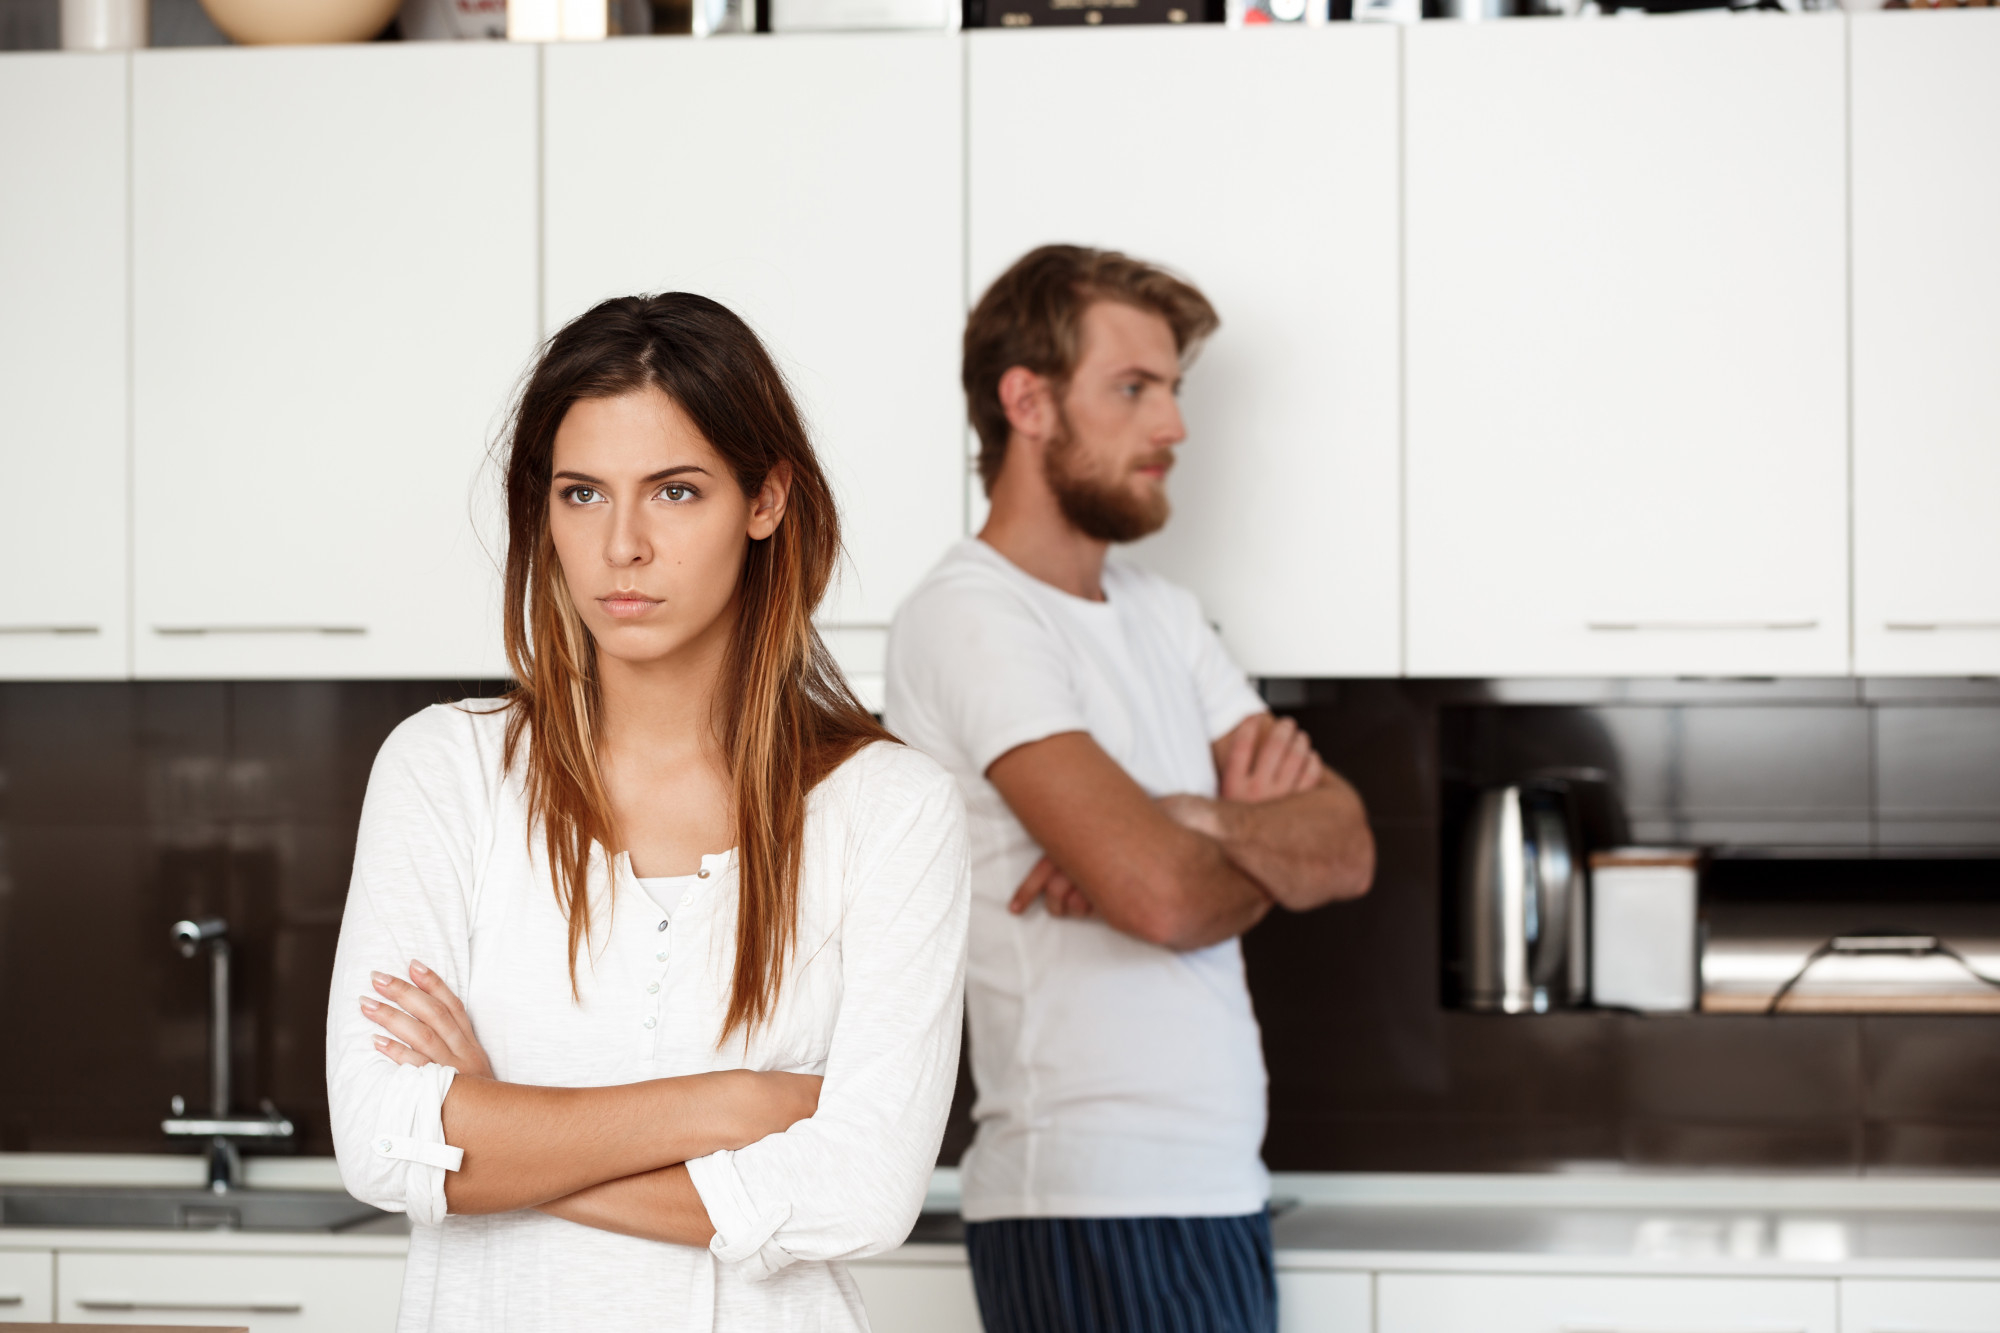 A couple giving each other the cold shoulder in the kitchen | Source: Freepik